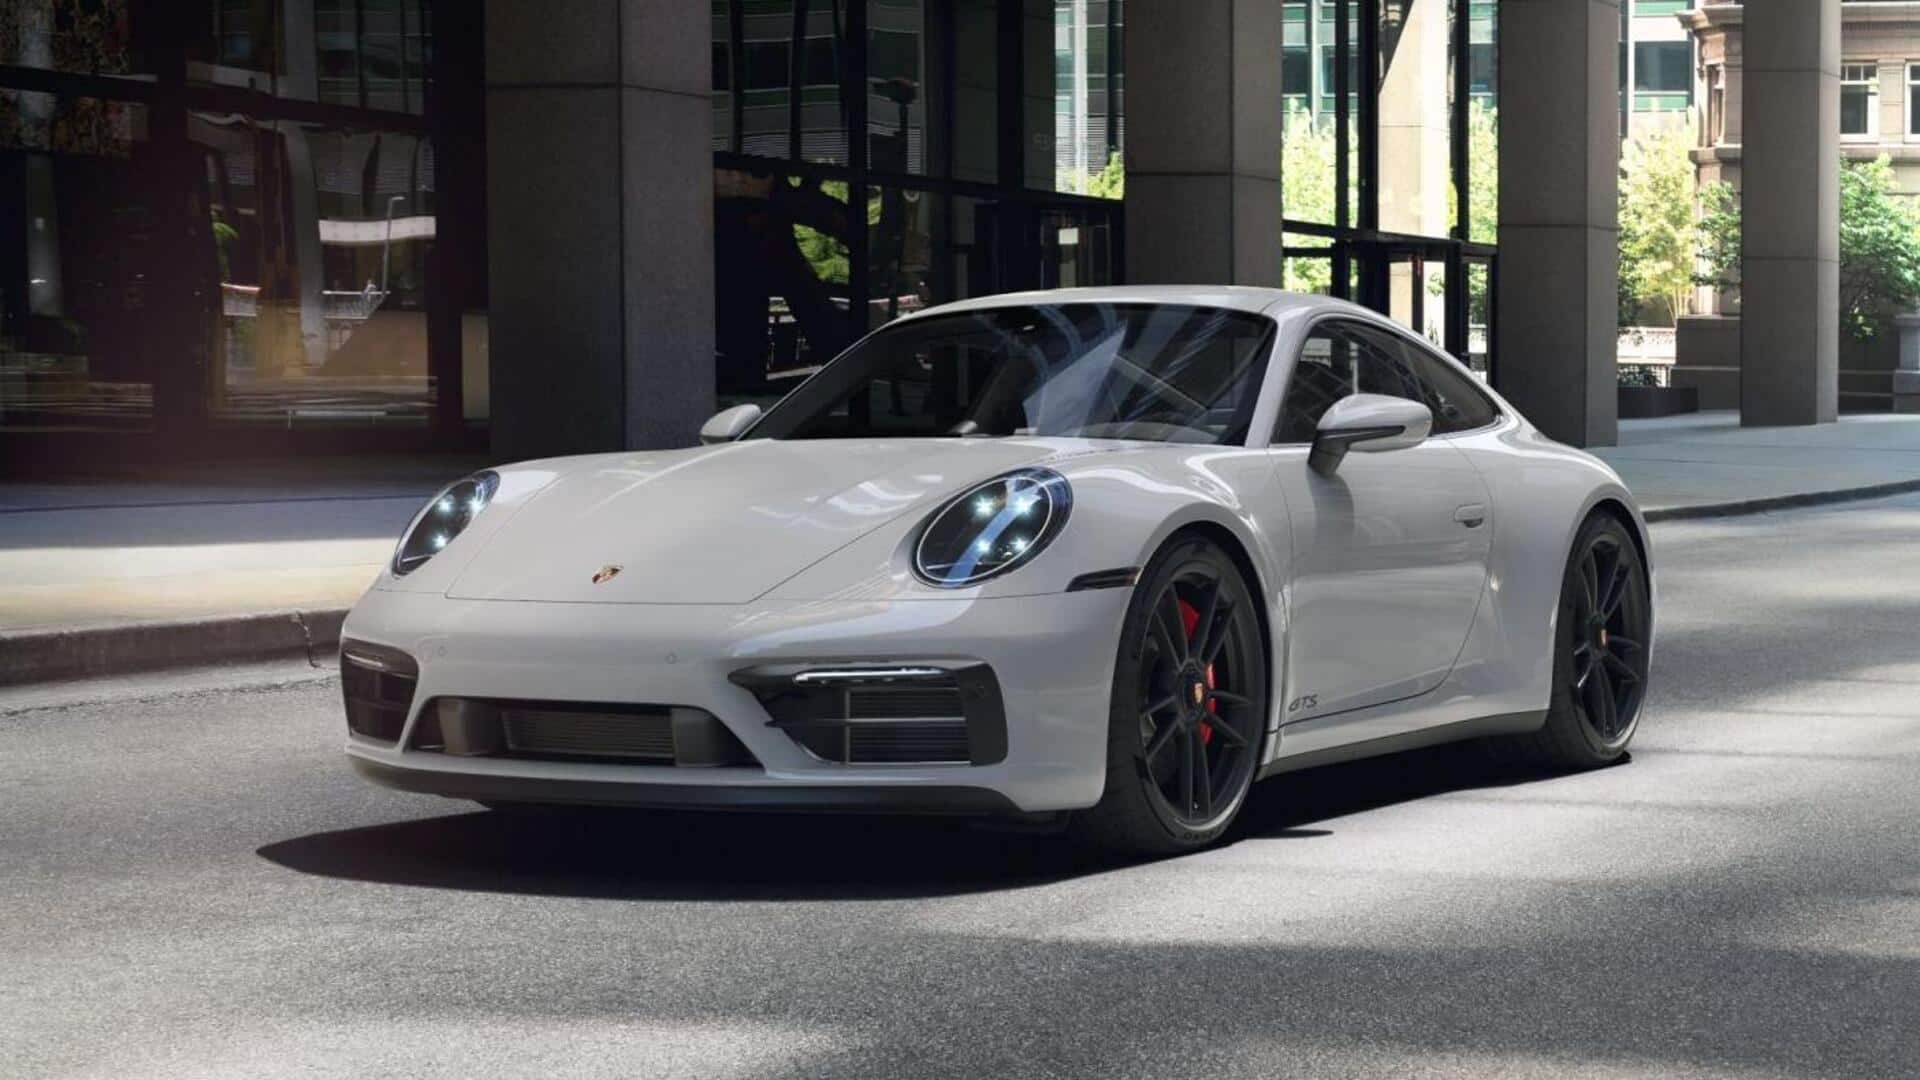 Porsche 911 GTS (facelift) prototype spotted with minimal camouflage